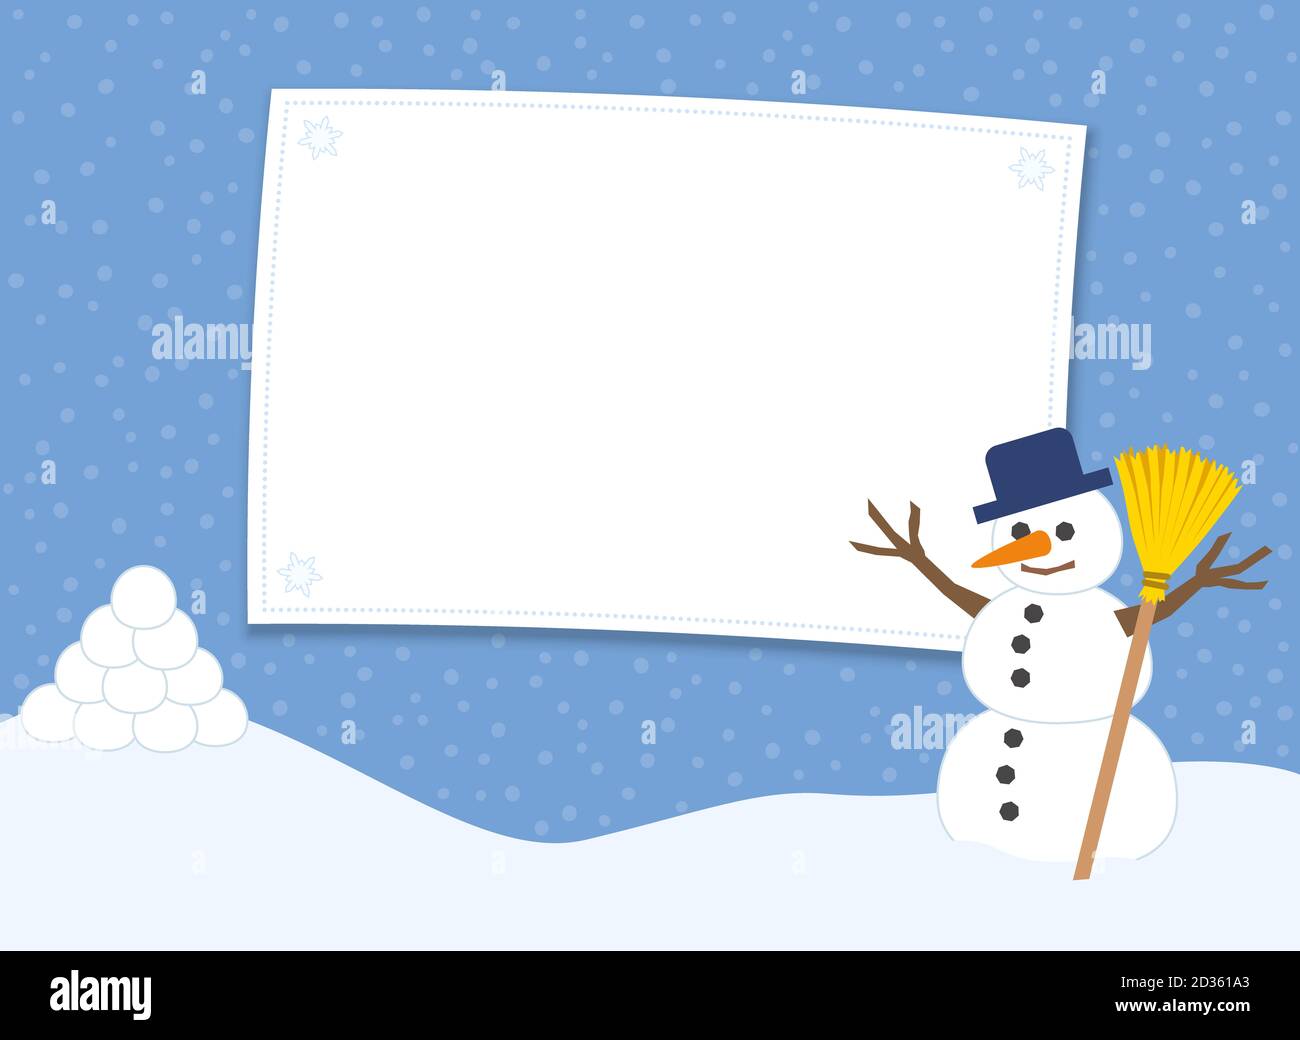 Snowballs and snowman before a snowball fight. Blank label for invitation for winter fun. Comic illustration on snowfall background. Stock Photo